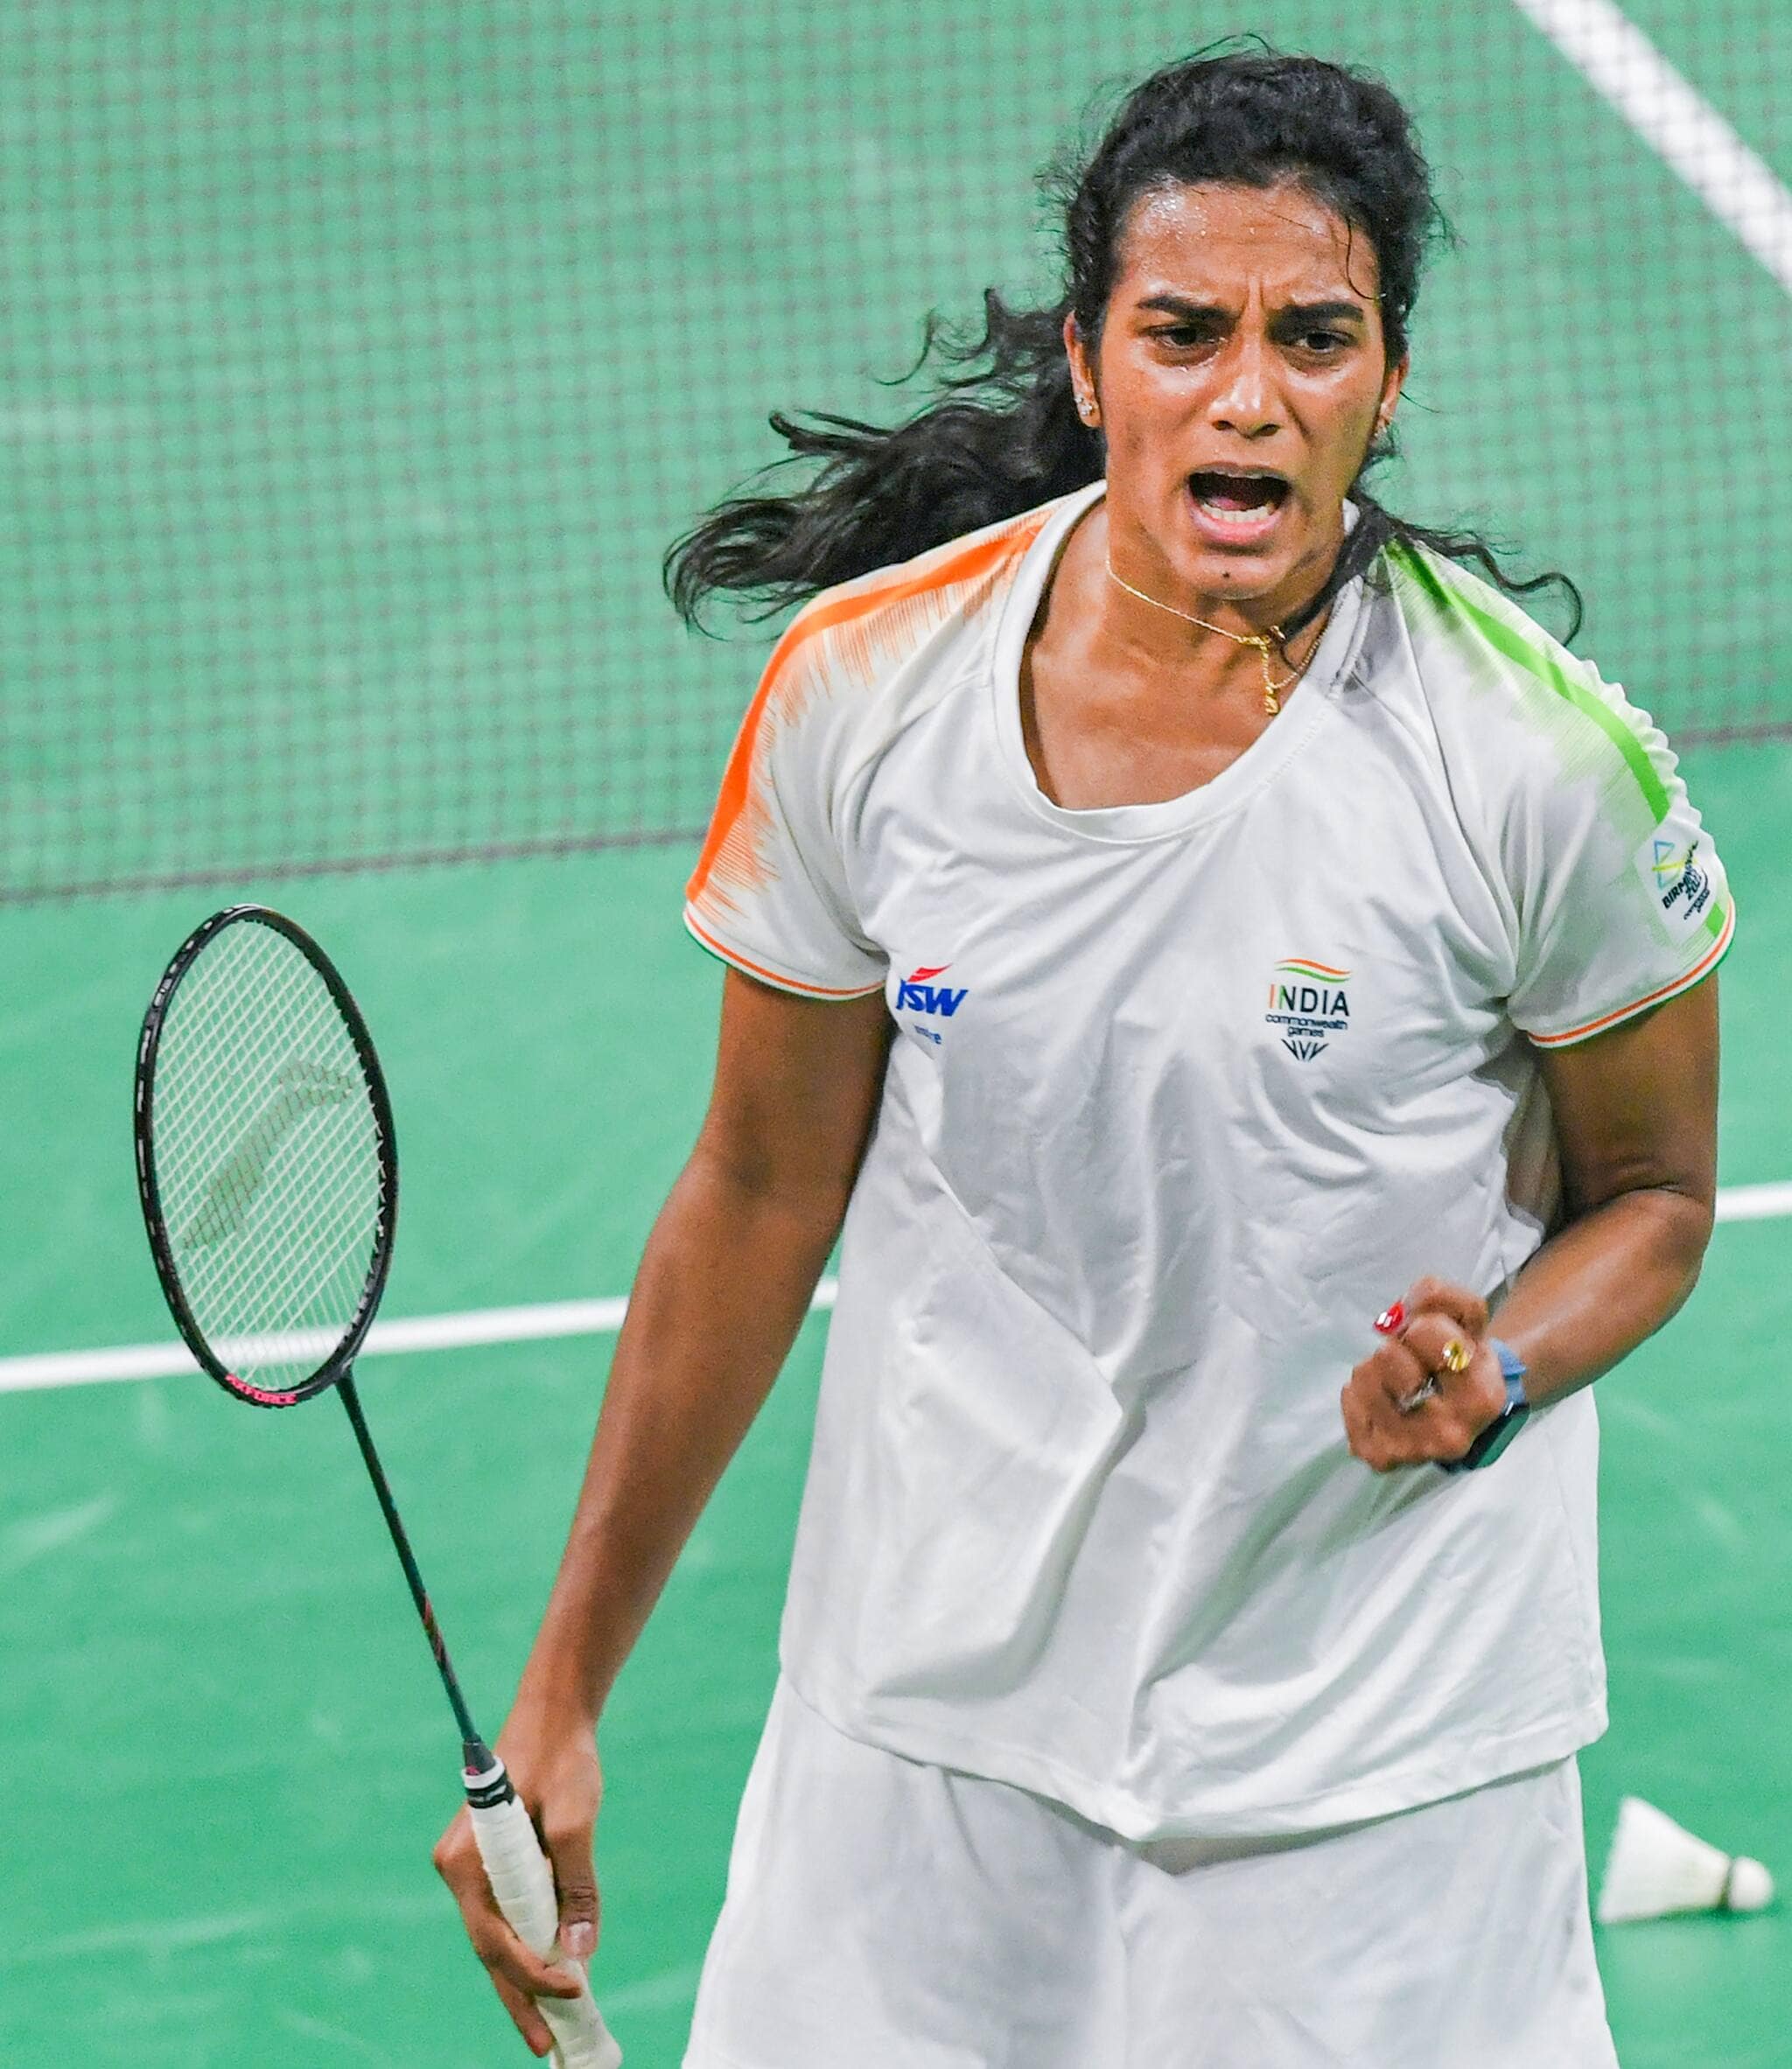 CWG 2022 Lakshya Sen, PV Sindhu Gunning for Gold in Badminton Singles; Mens, Womens and Mixed Pairs Pose Strong Medal Challenge